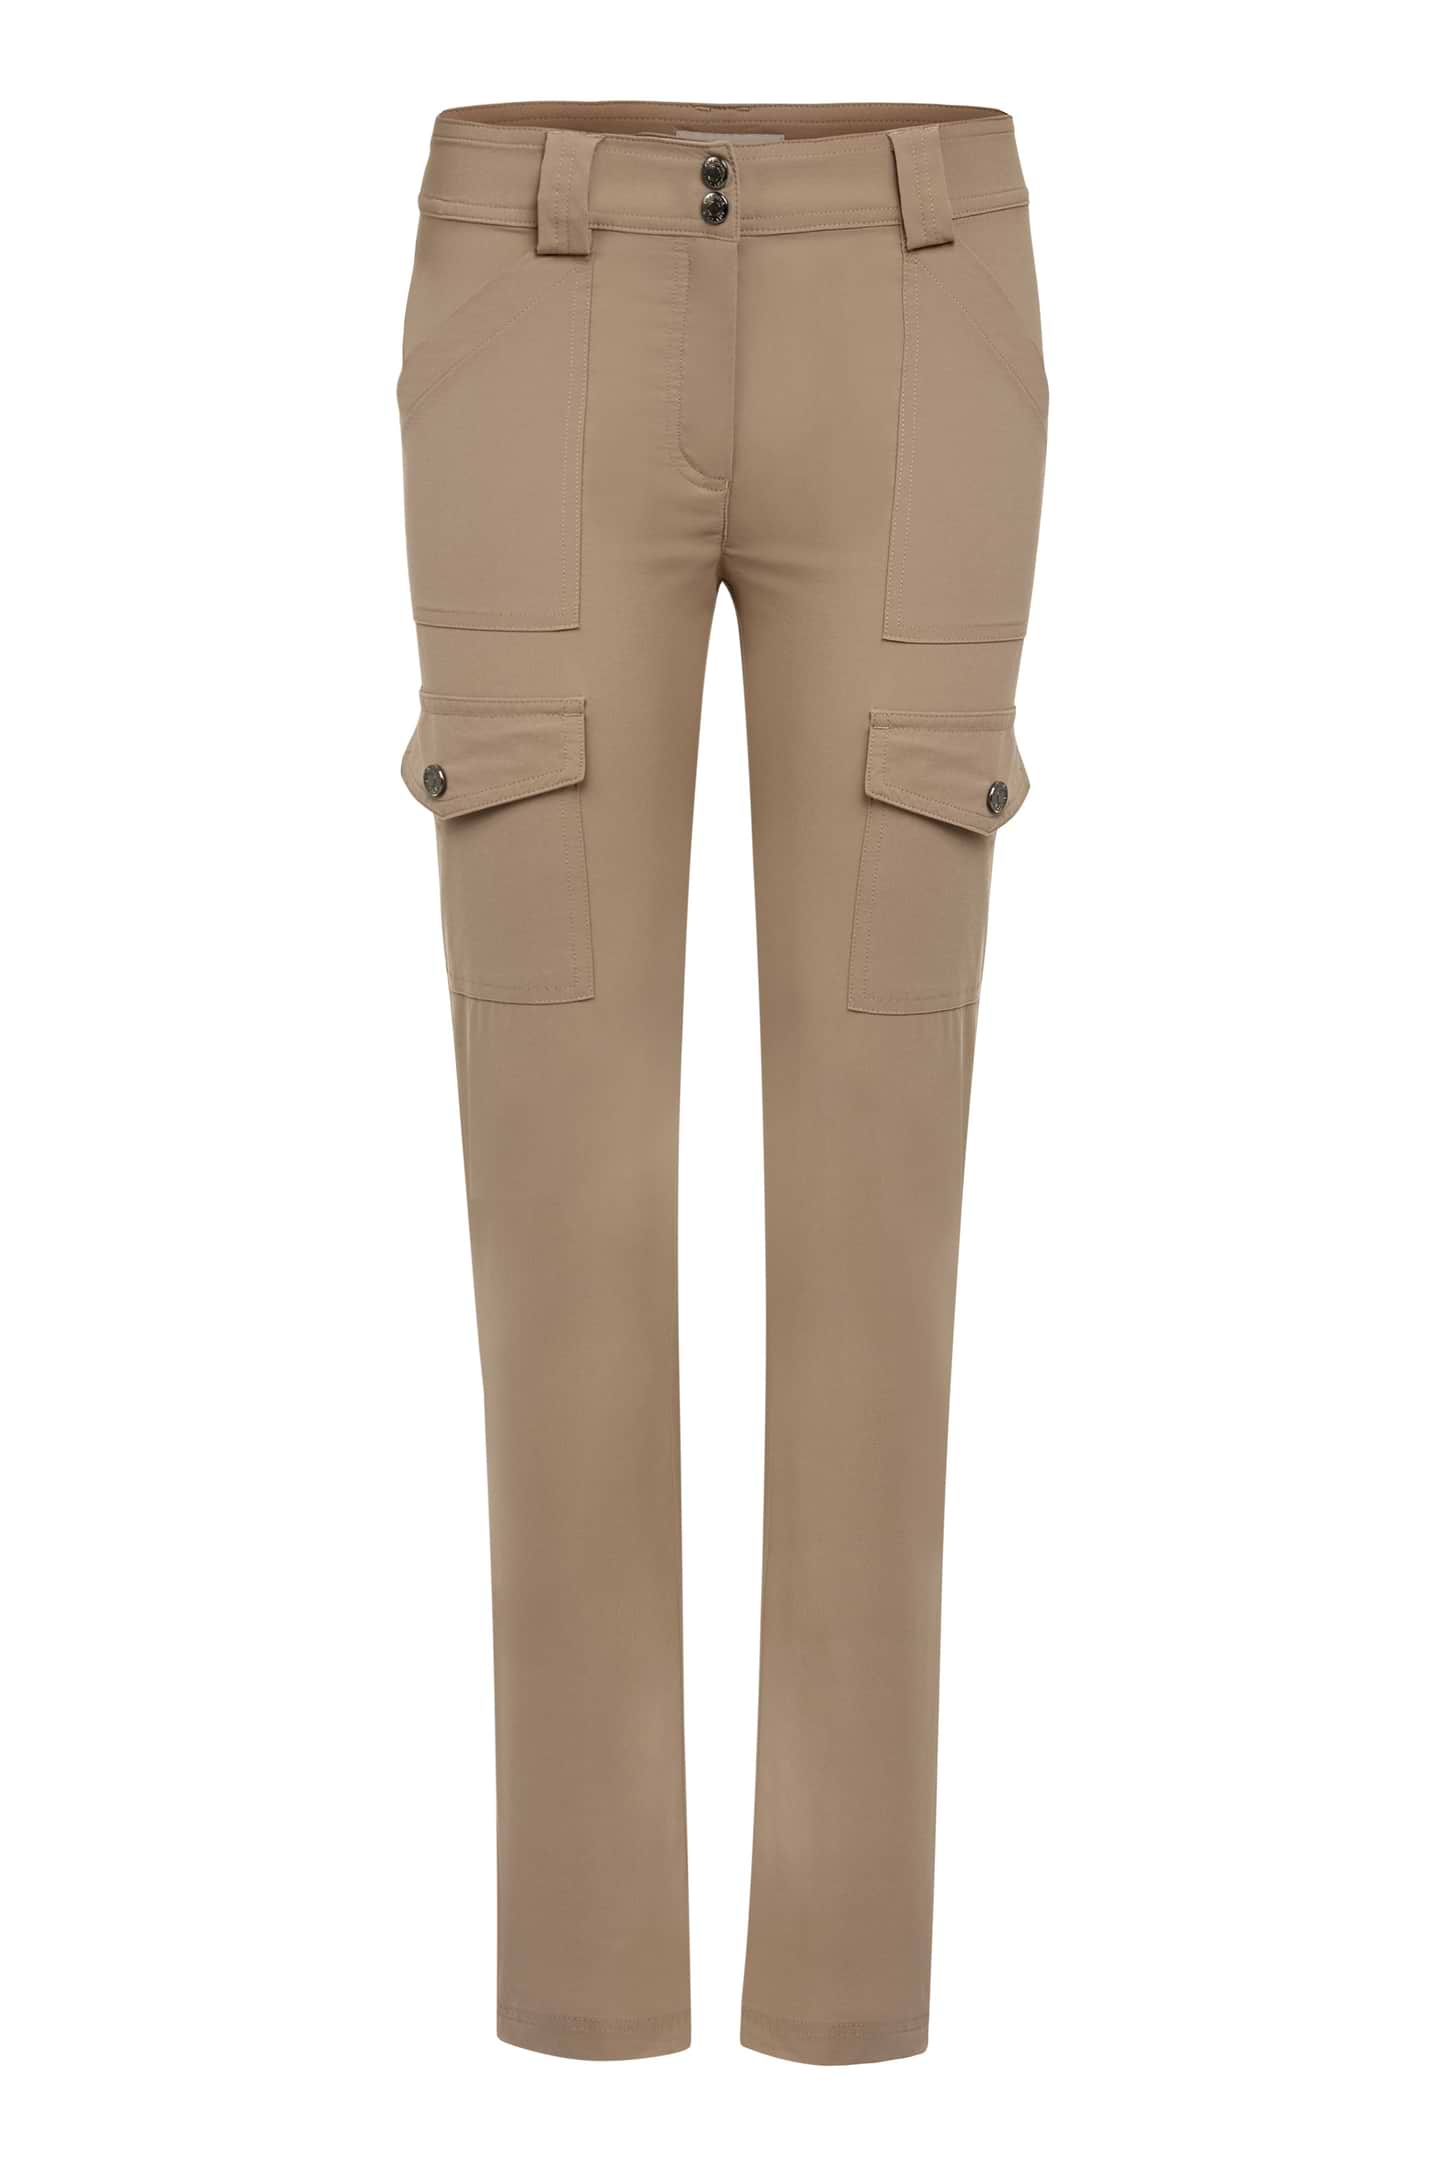 The Best Travel Cargo Pants. Flat Lay of the Kate Skinny Cargo Pant in Khaki